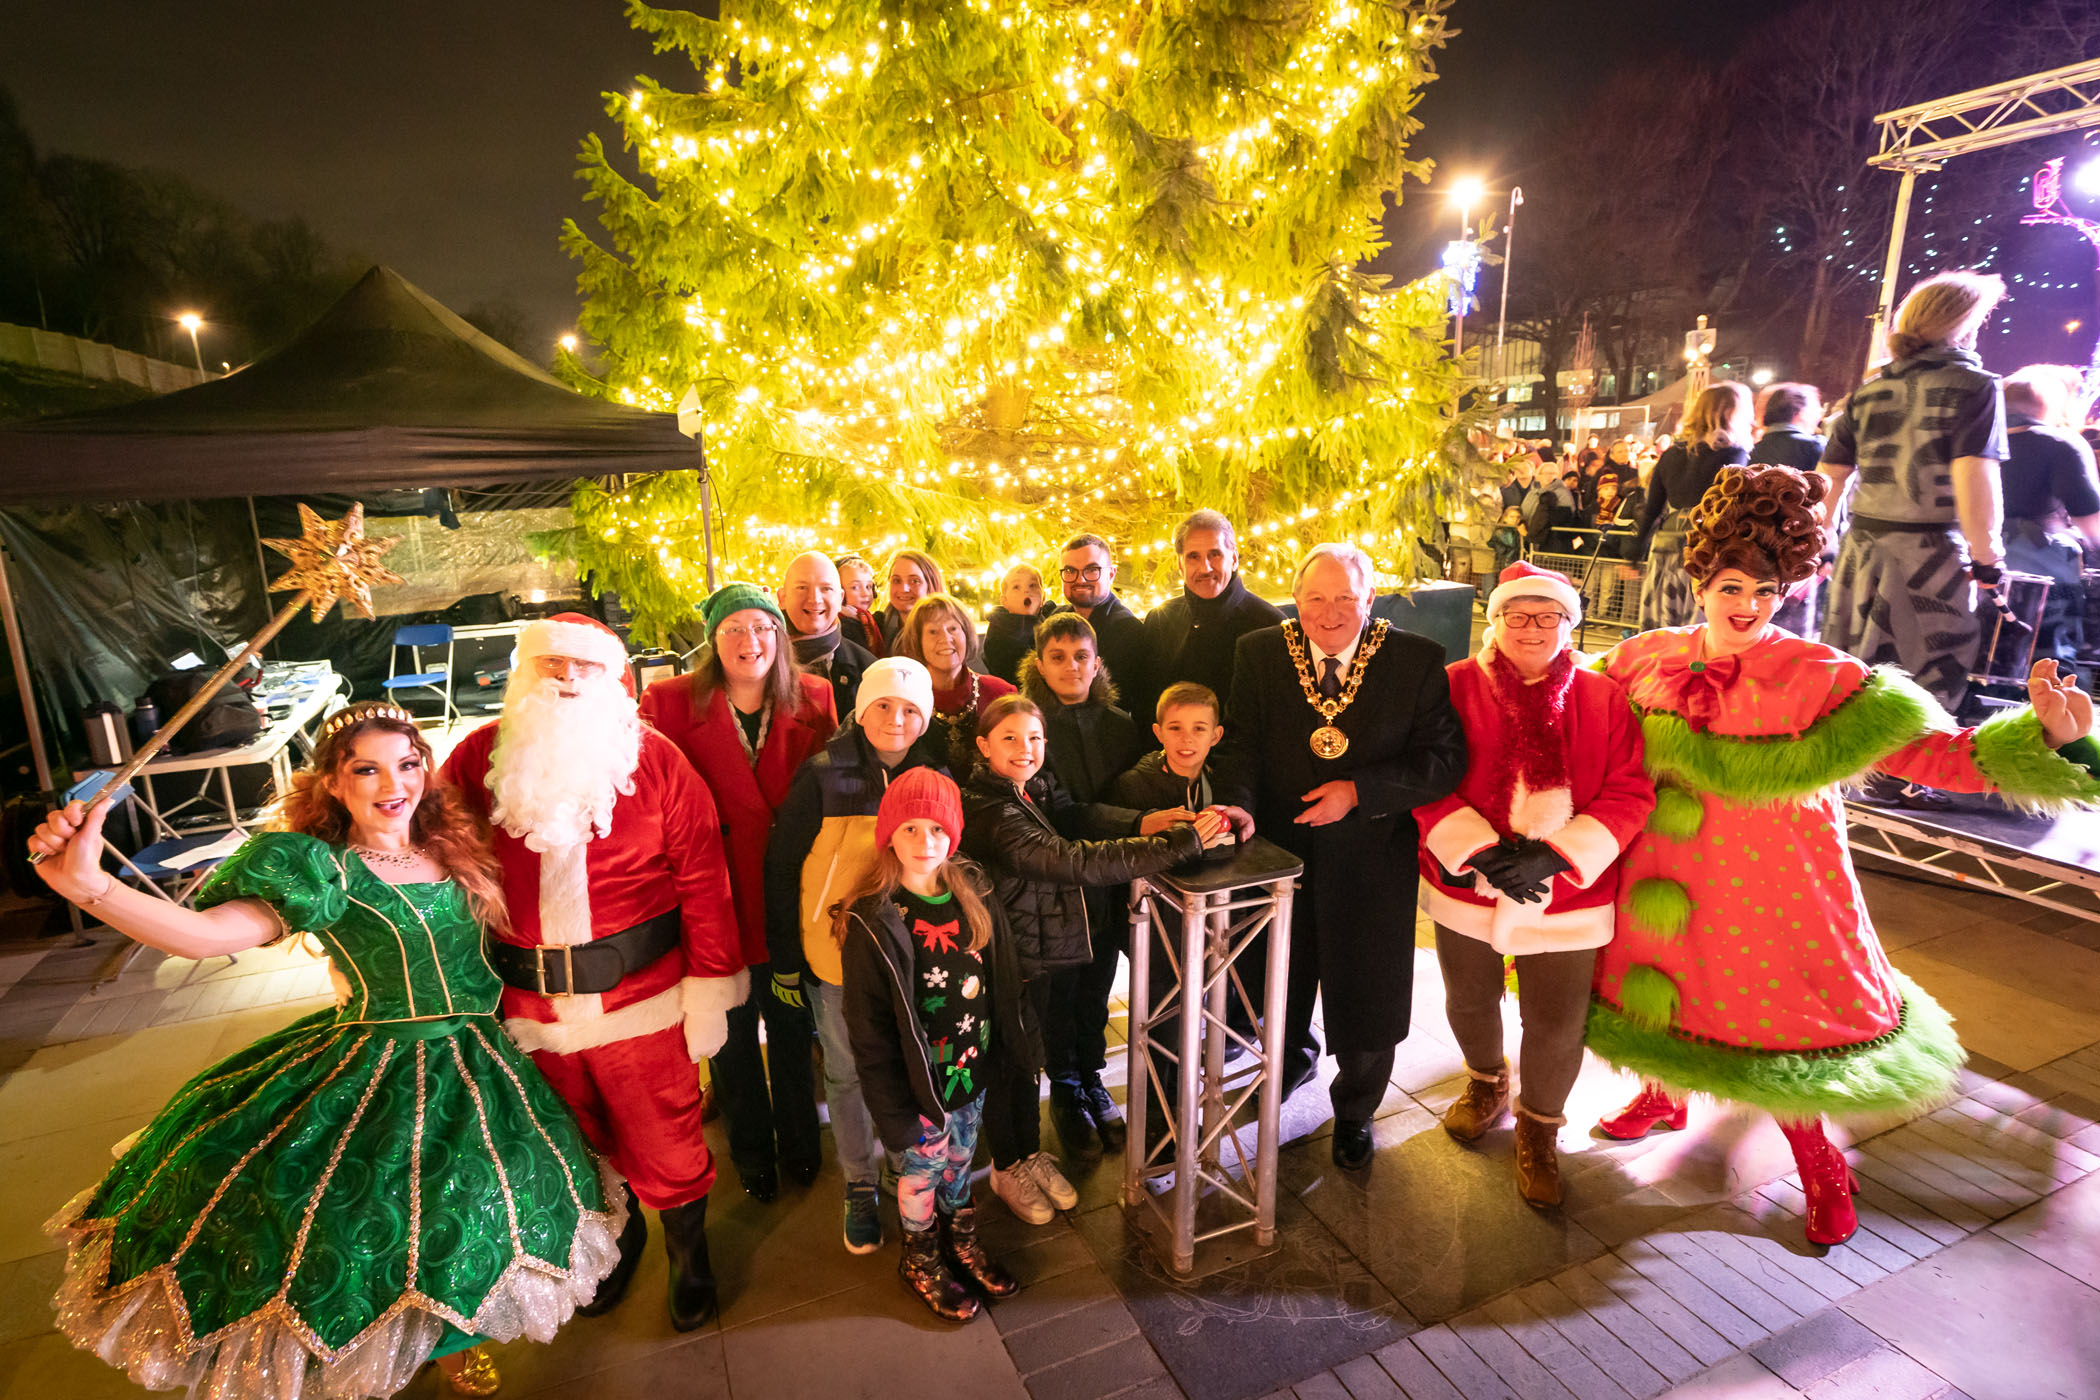 Image: Fire and festivities as Christmas countdown starts in Rochdale